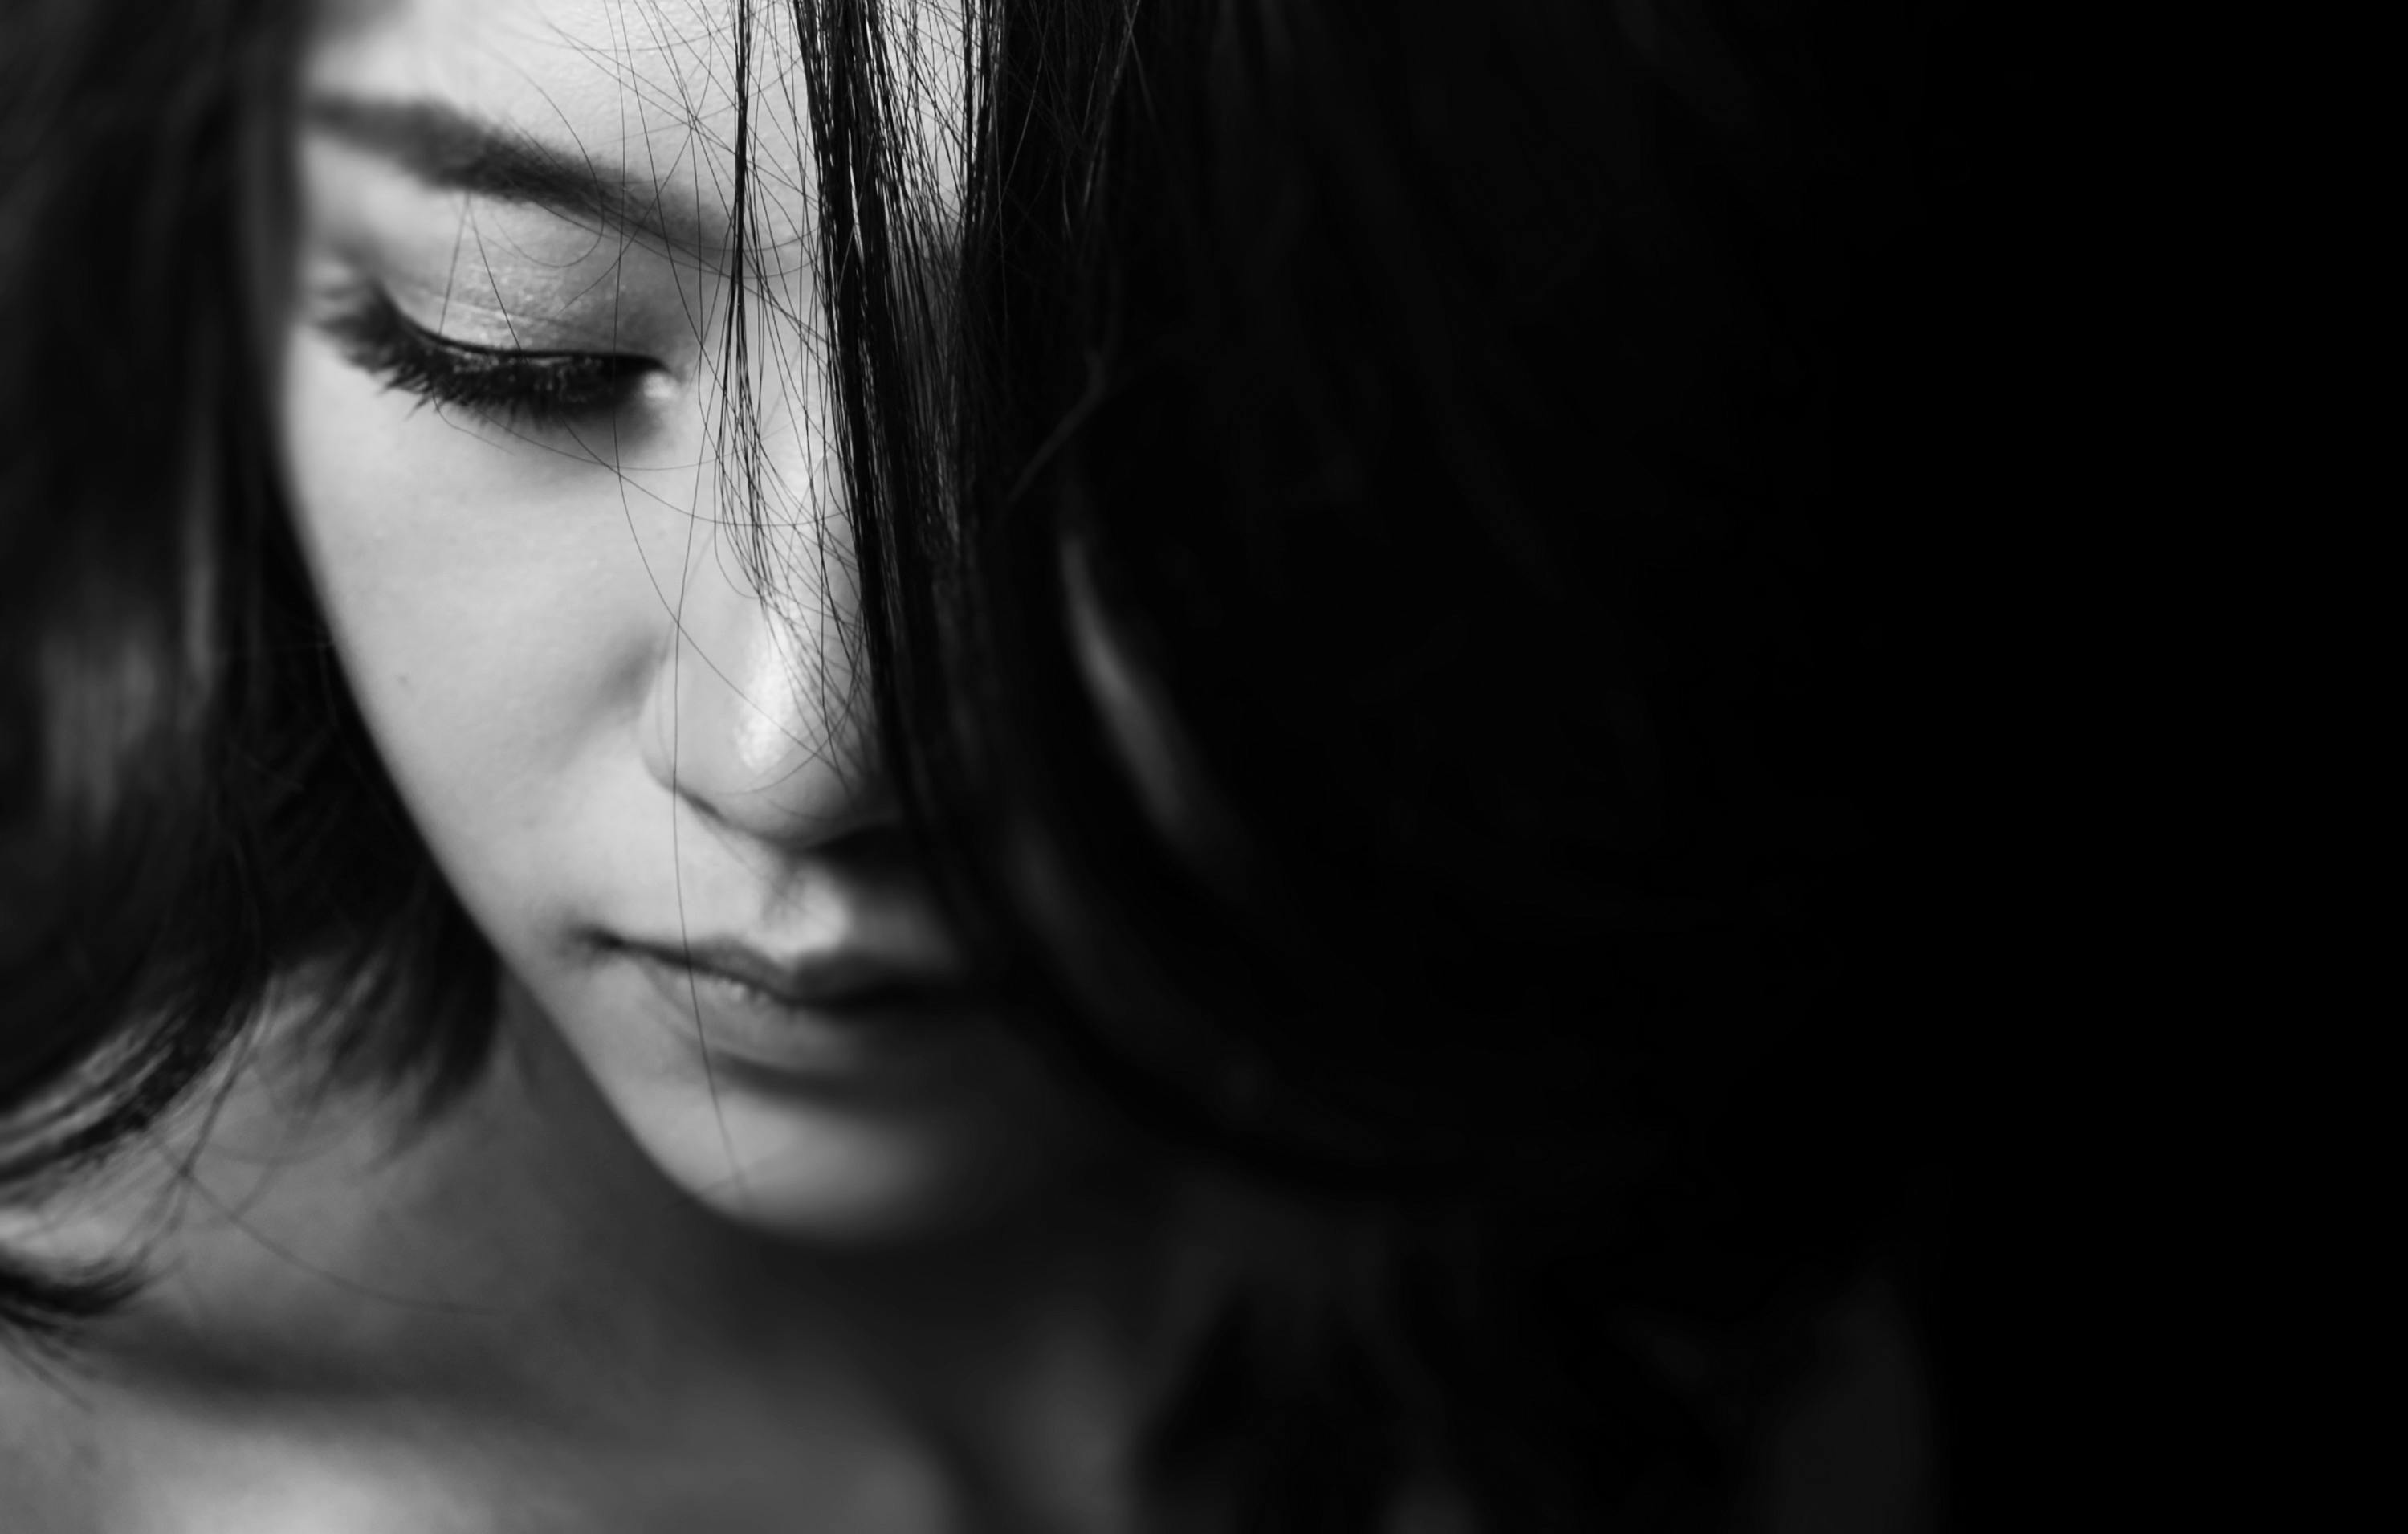 A sad woman. For illustration purposes only | Source: Pexels